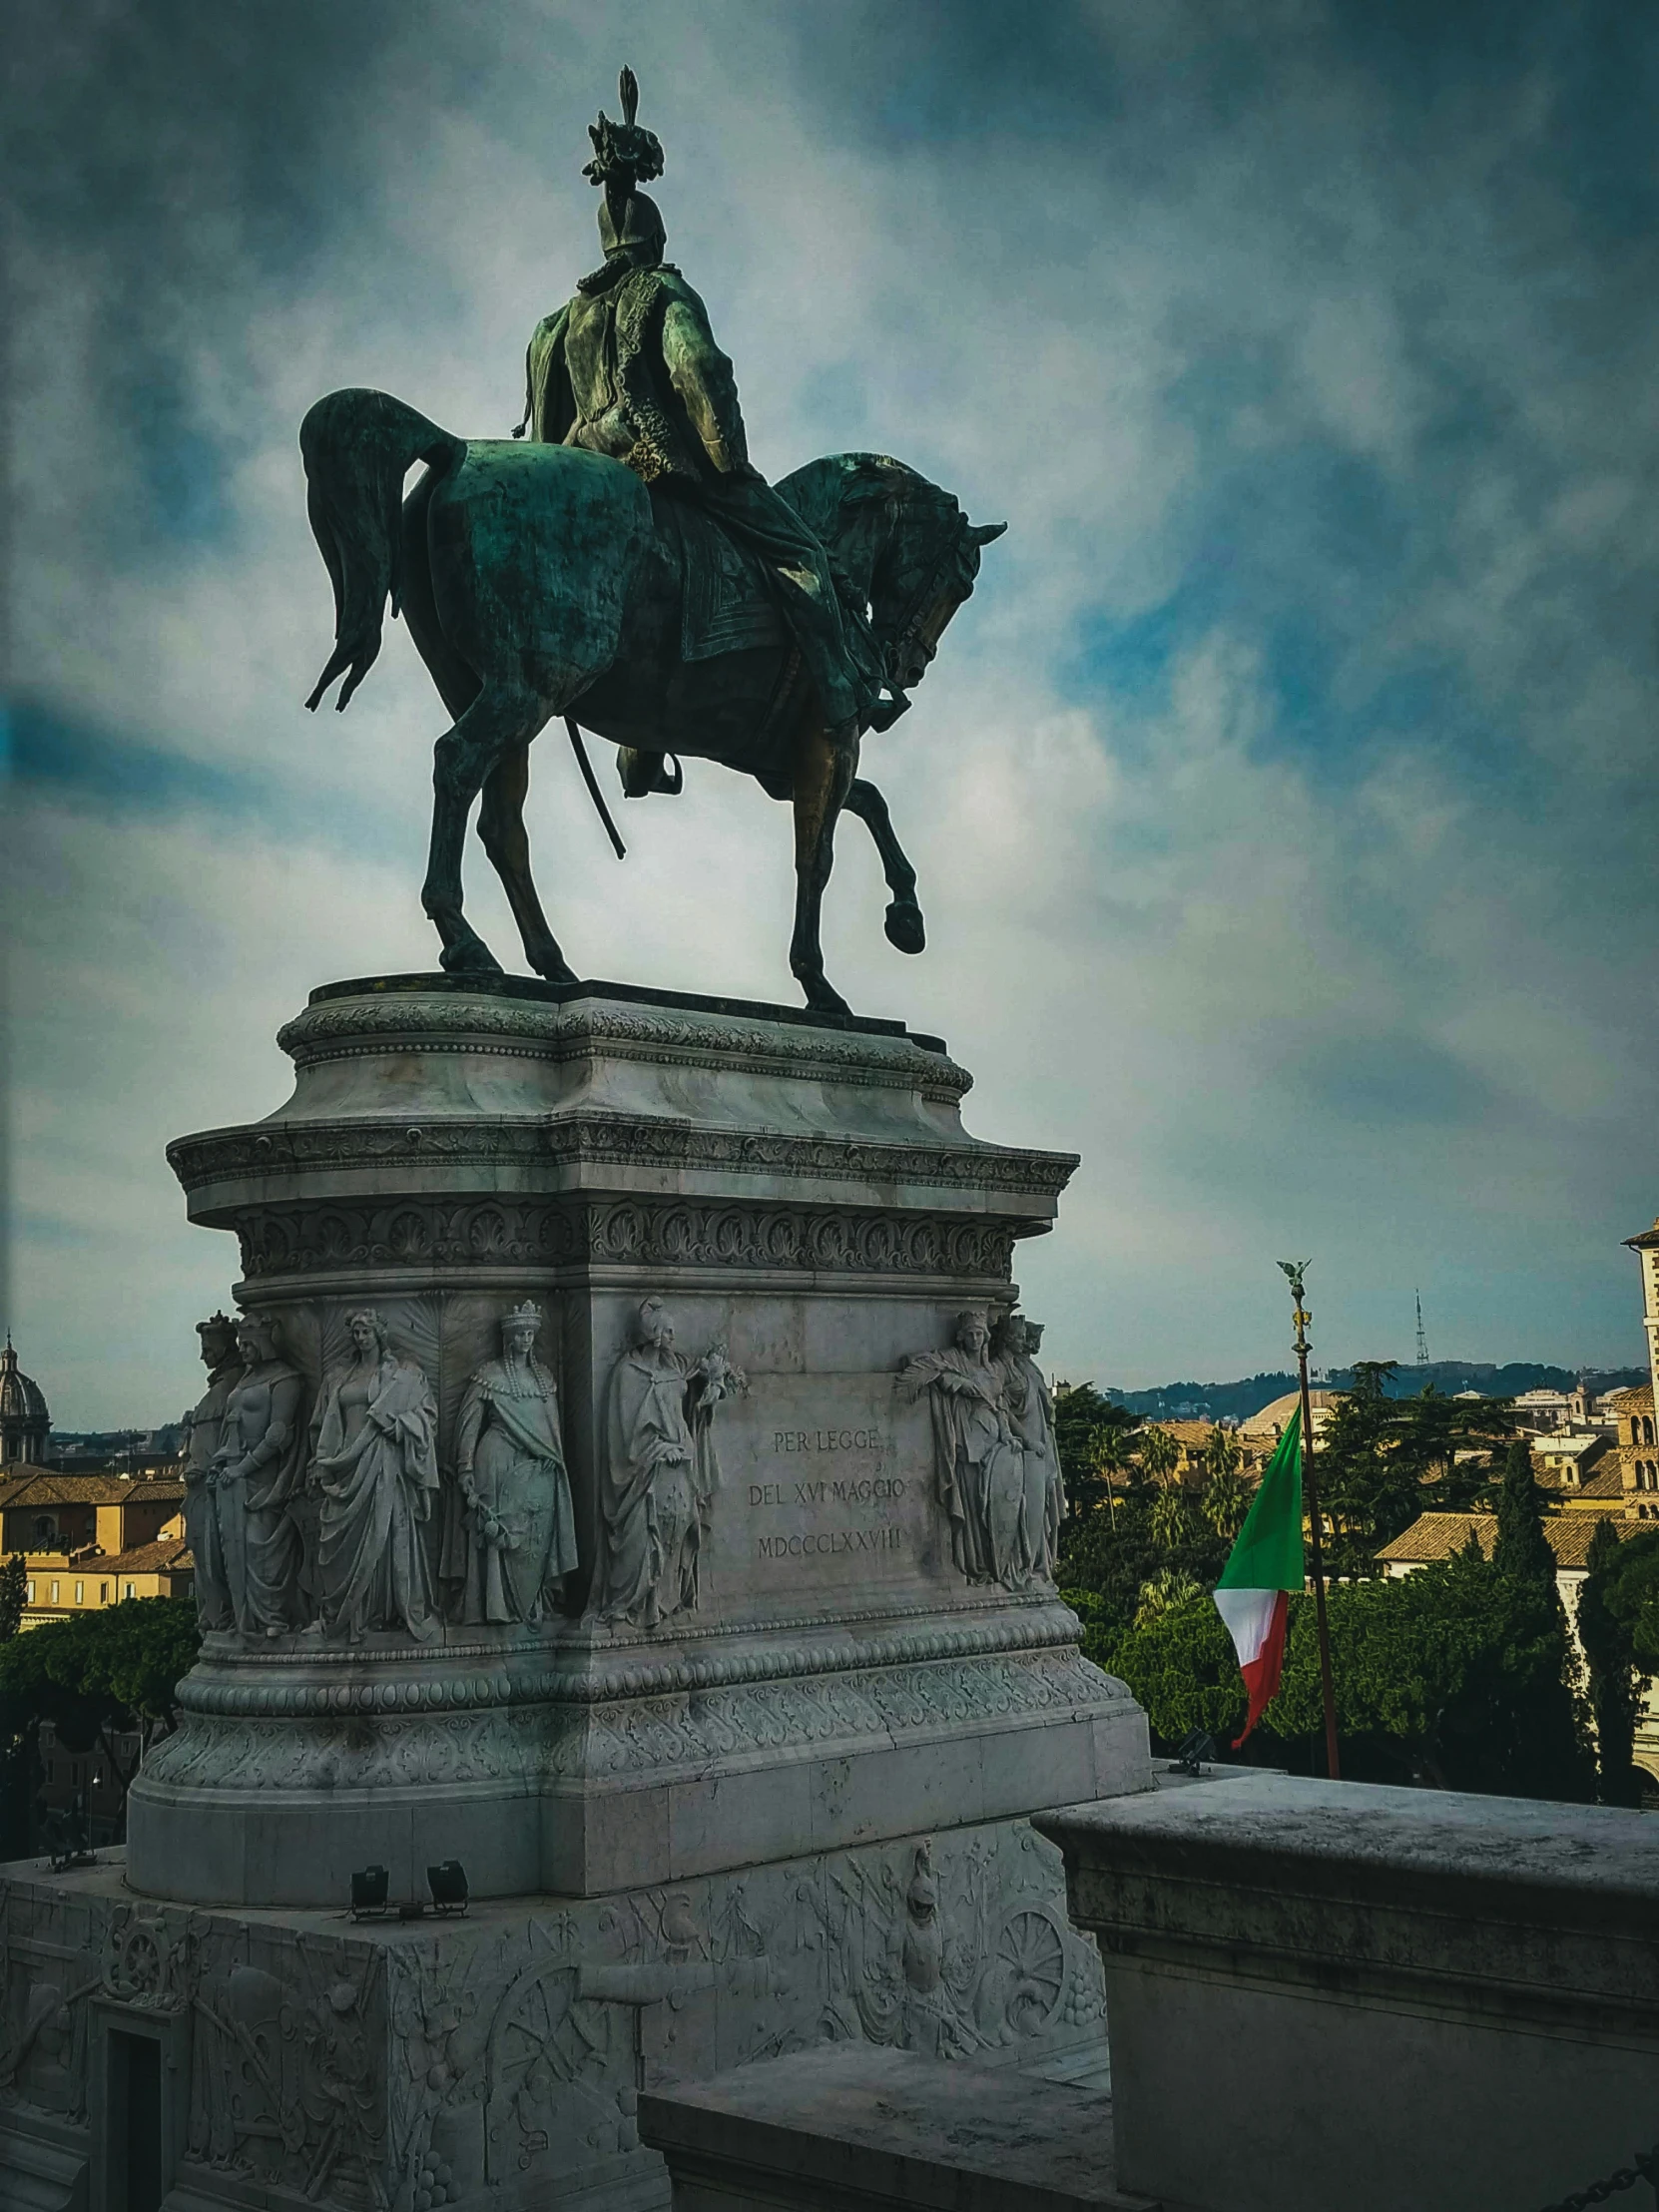 an image of a statue of a man riding a horse